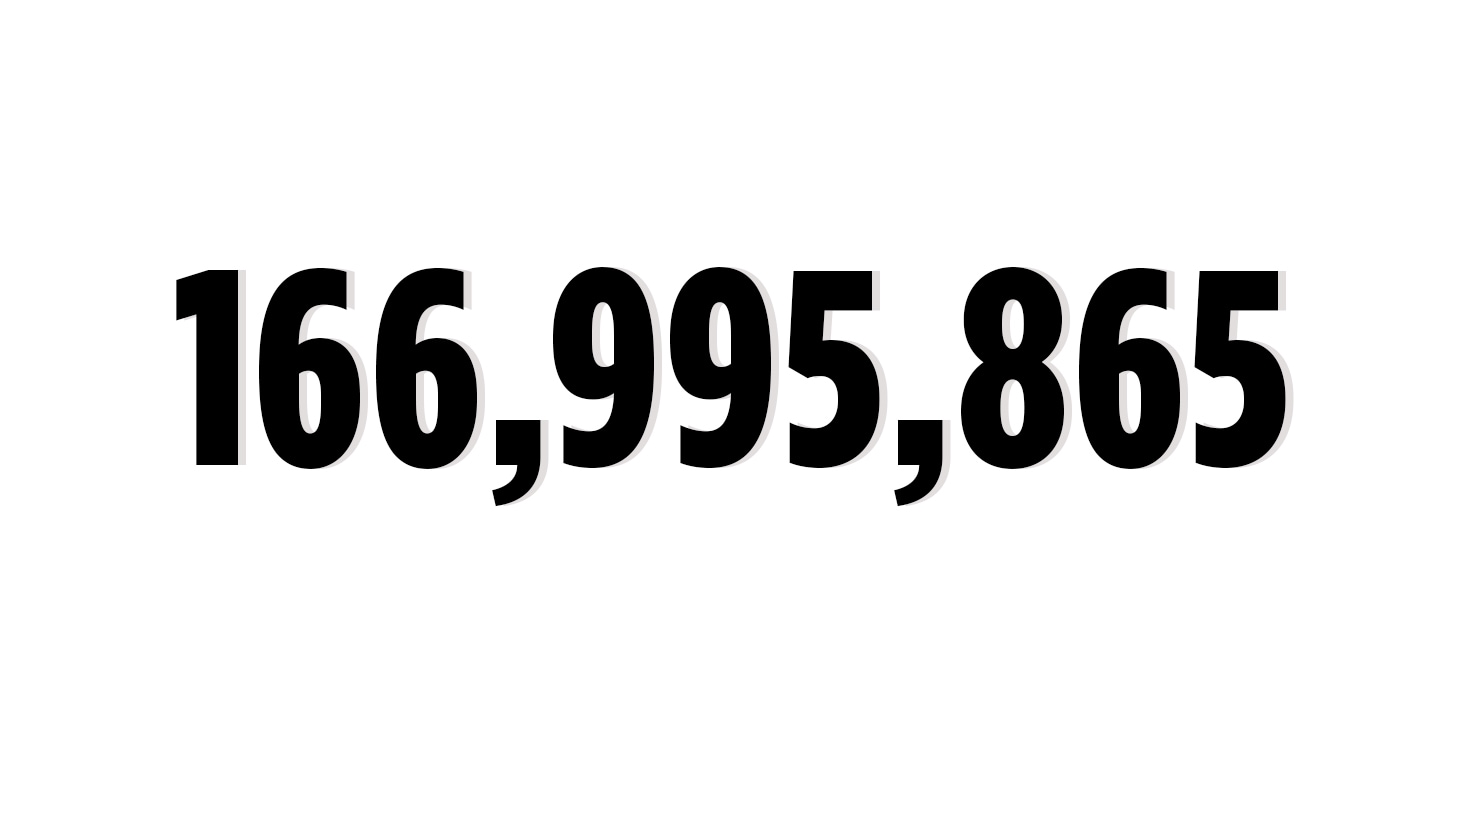 The amount, in dollars, won by Titleist golf...